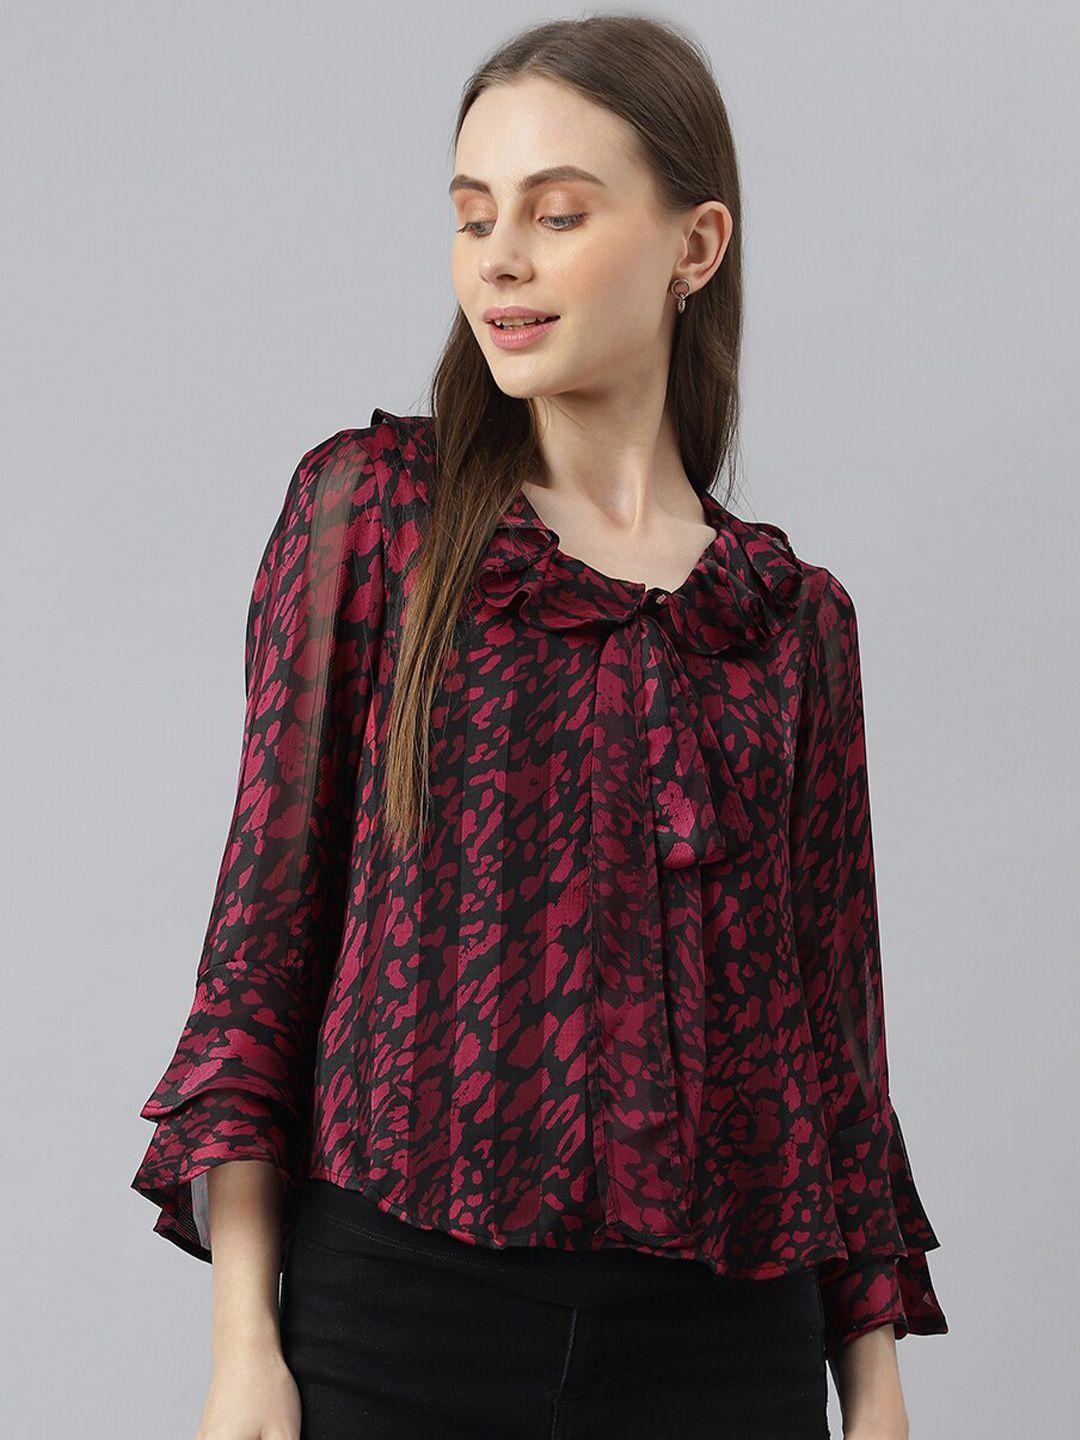 Latin Quarters Animal Printed Tie-Up Neck Flared Sleeves Gathered Top